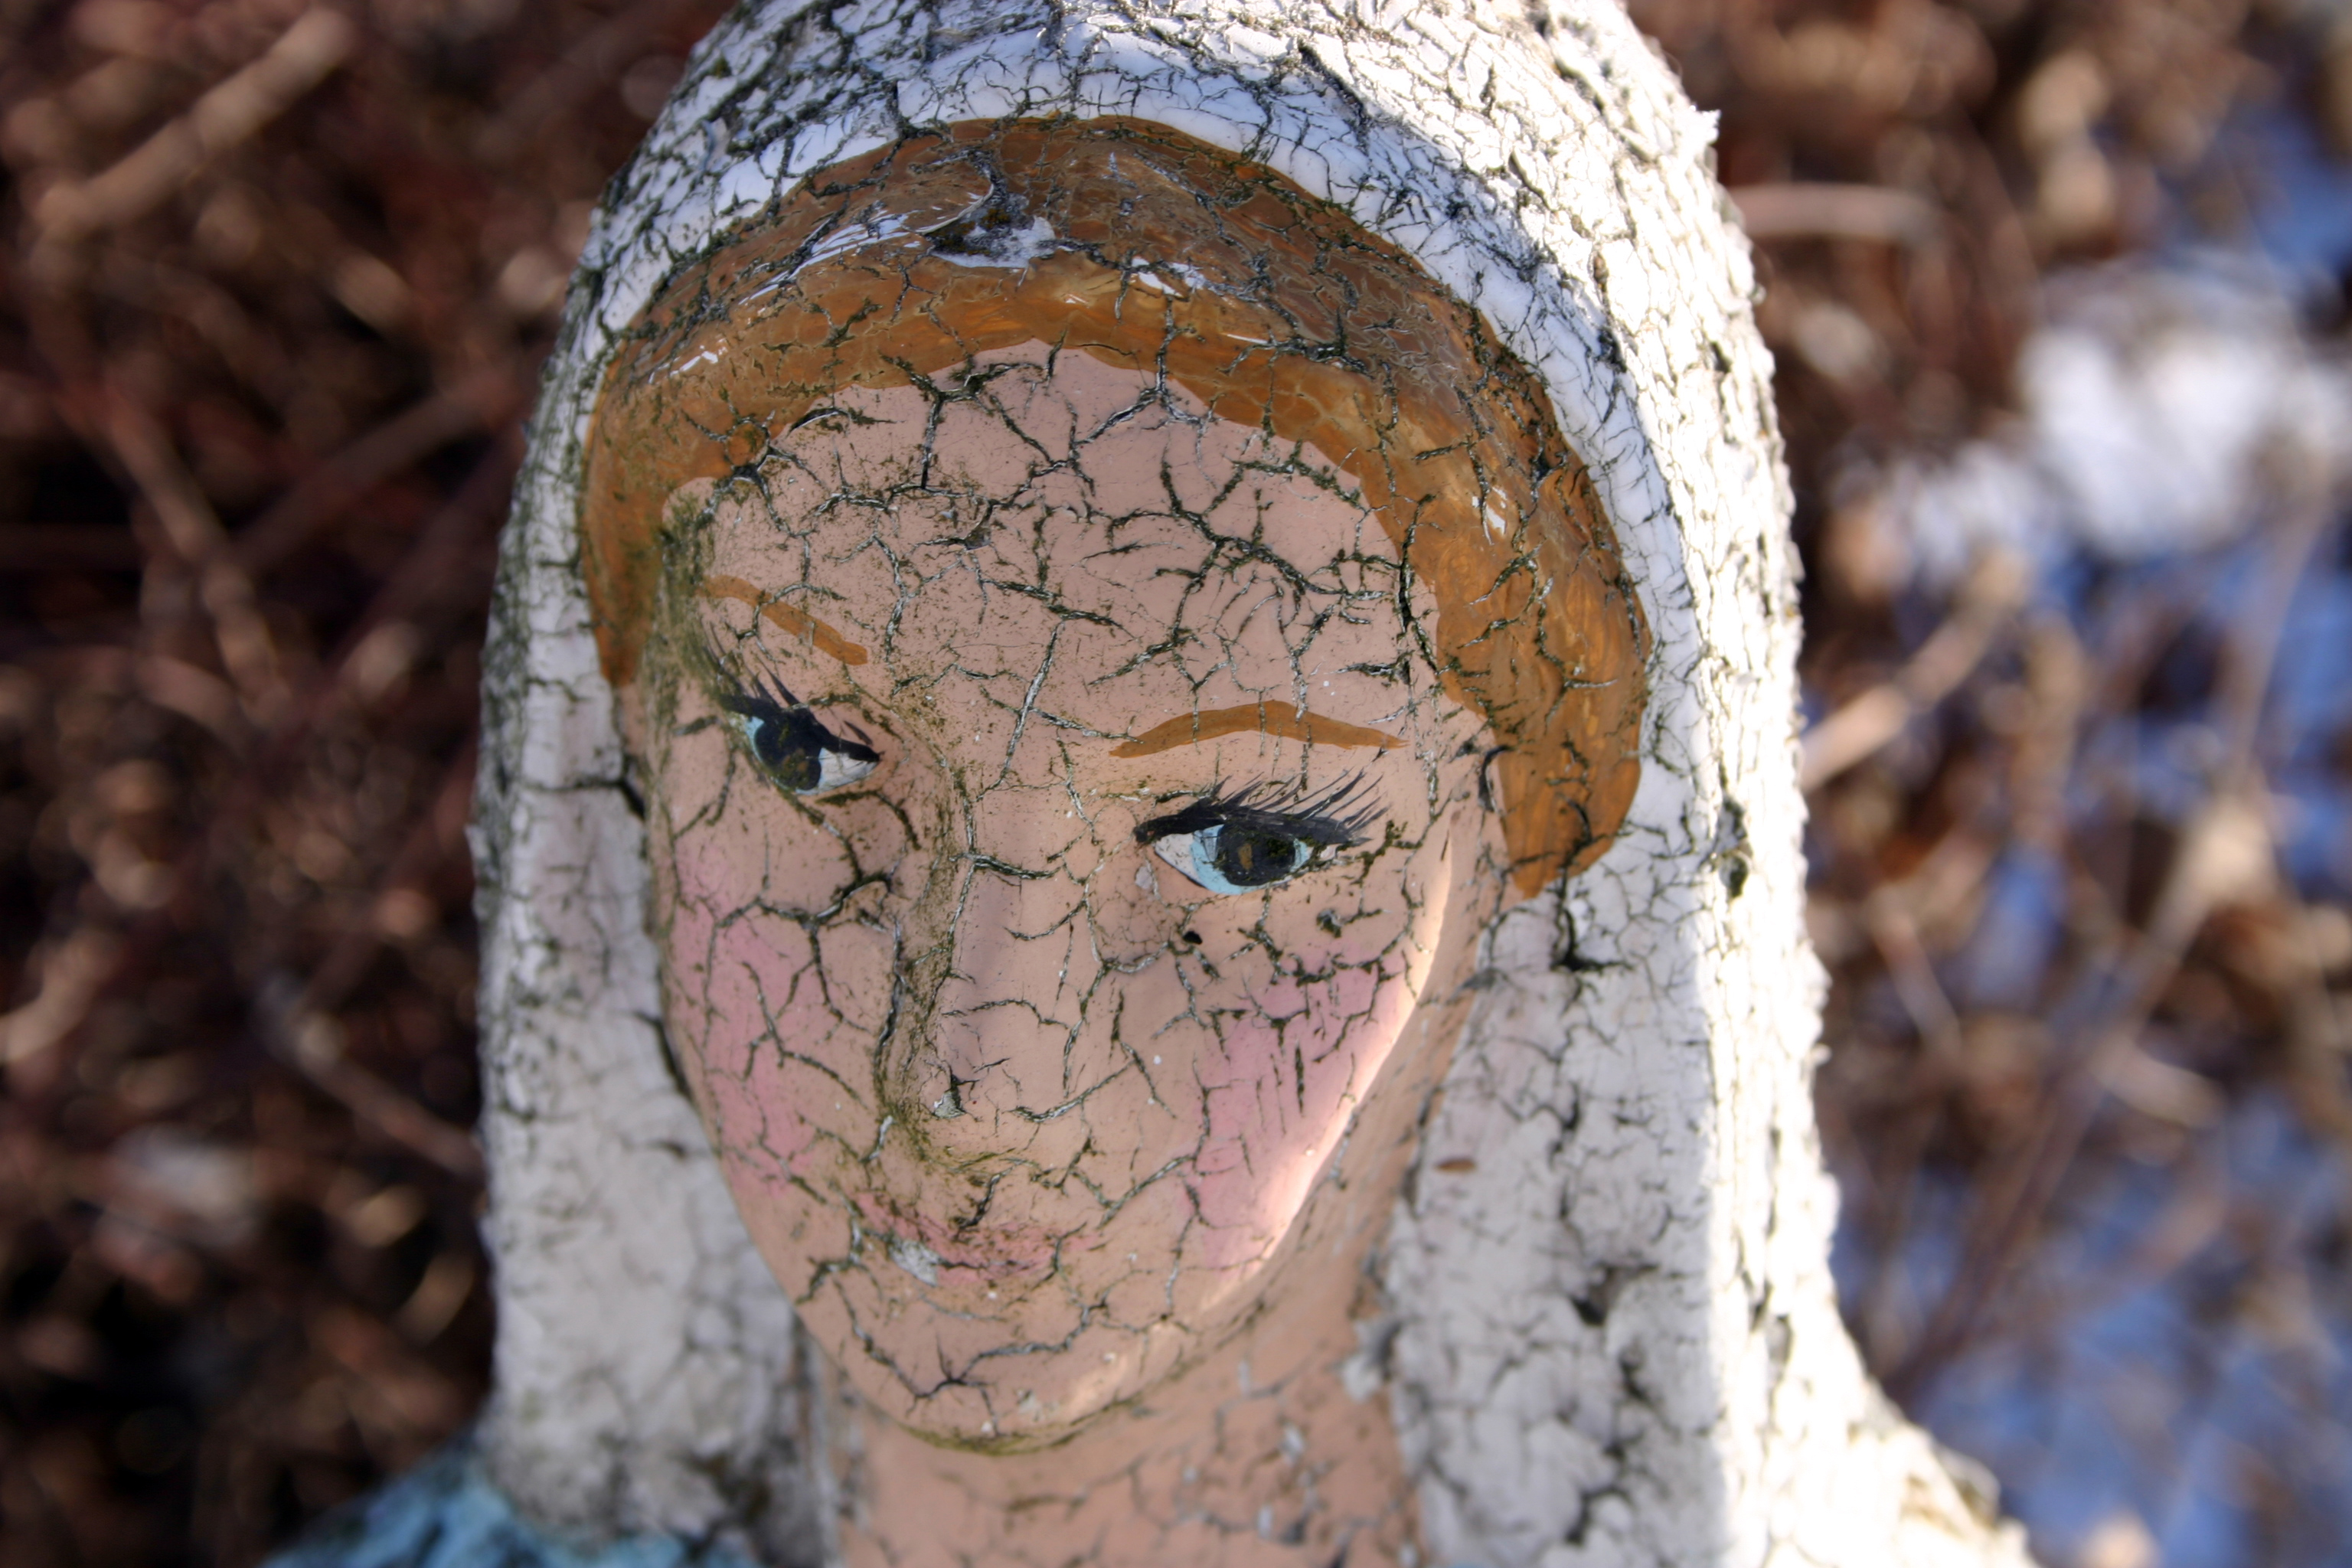 The Statue of the Virgin Mary in our backyard